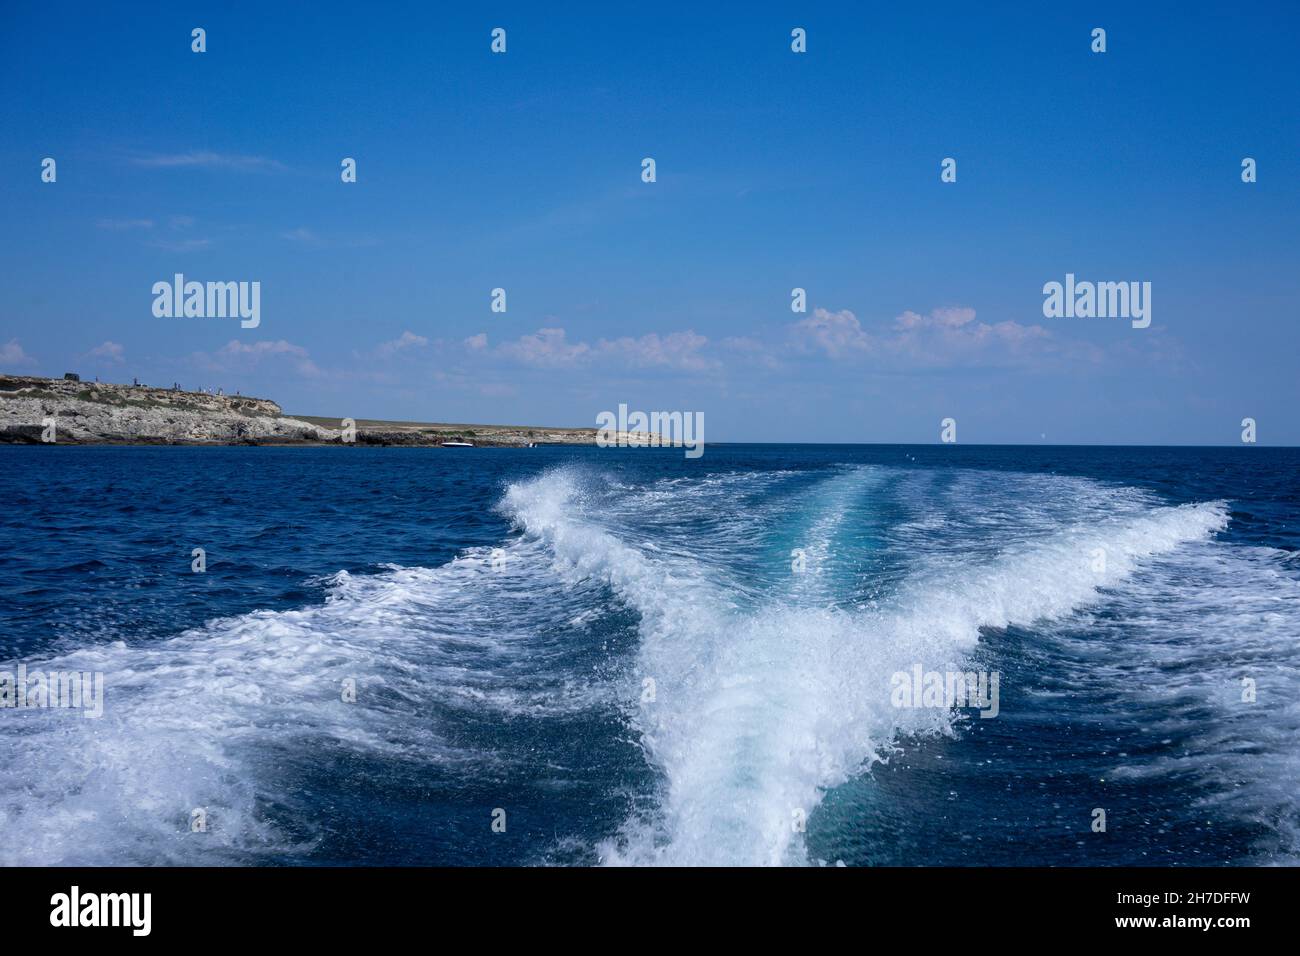 White foam trail from the movement of the boat on a blue background. Travel by sea. Stock Photo